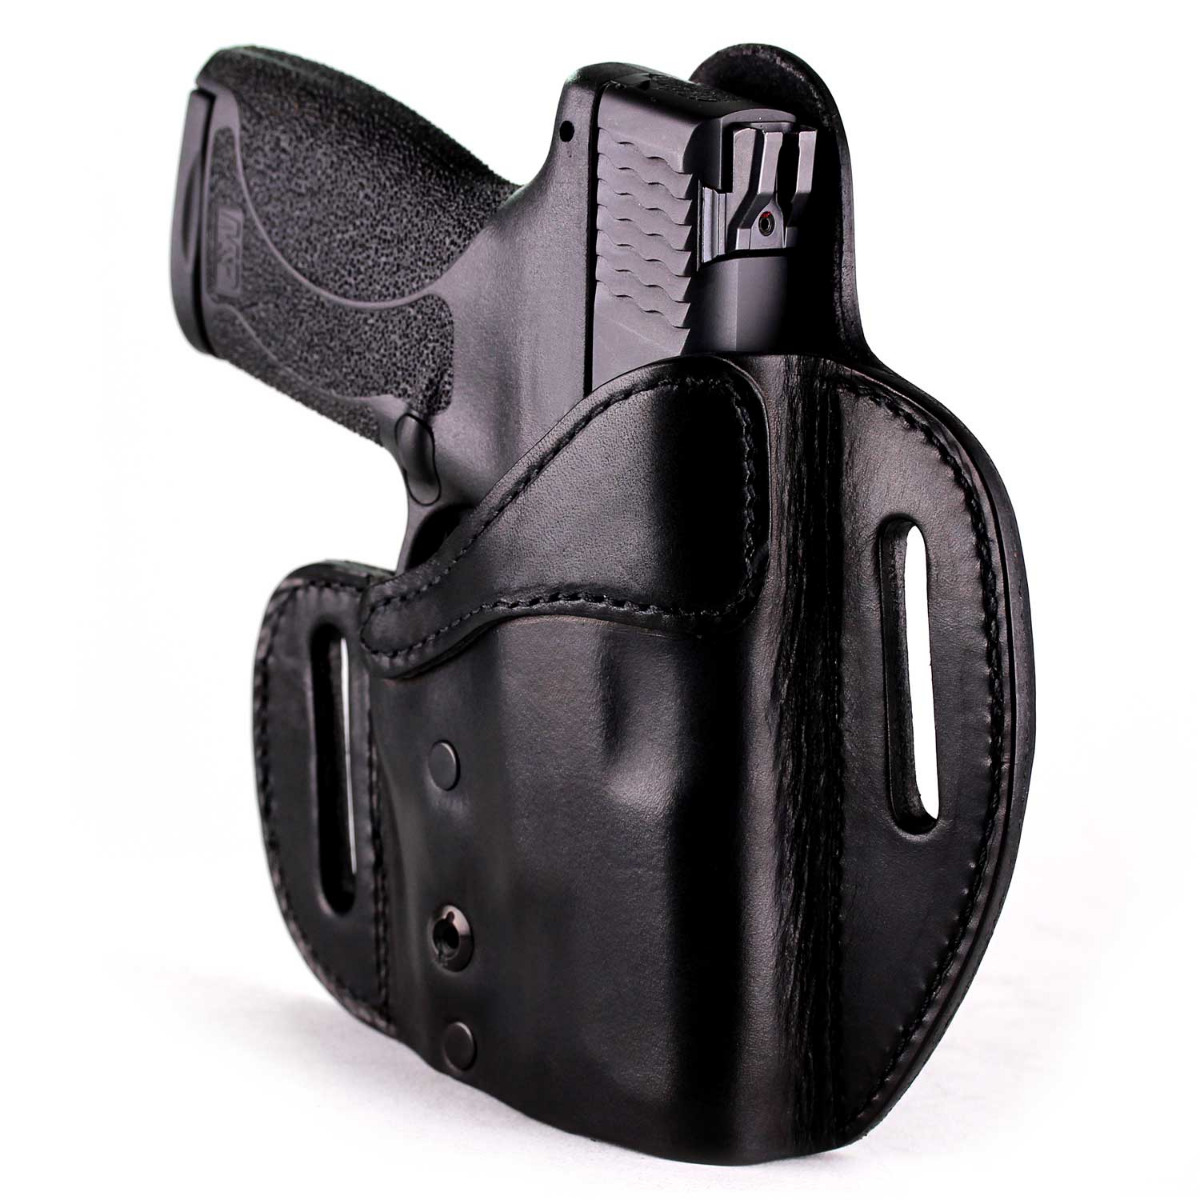 Details about   TAGUA PREMIUM BLACK LEATHER 2-WAY OWB RH BELT HOLSTER for 5" 1911 TAURUS CZ + 